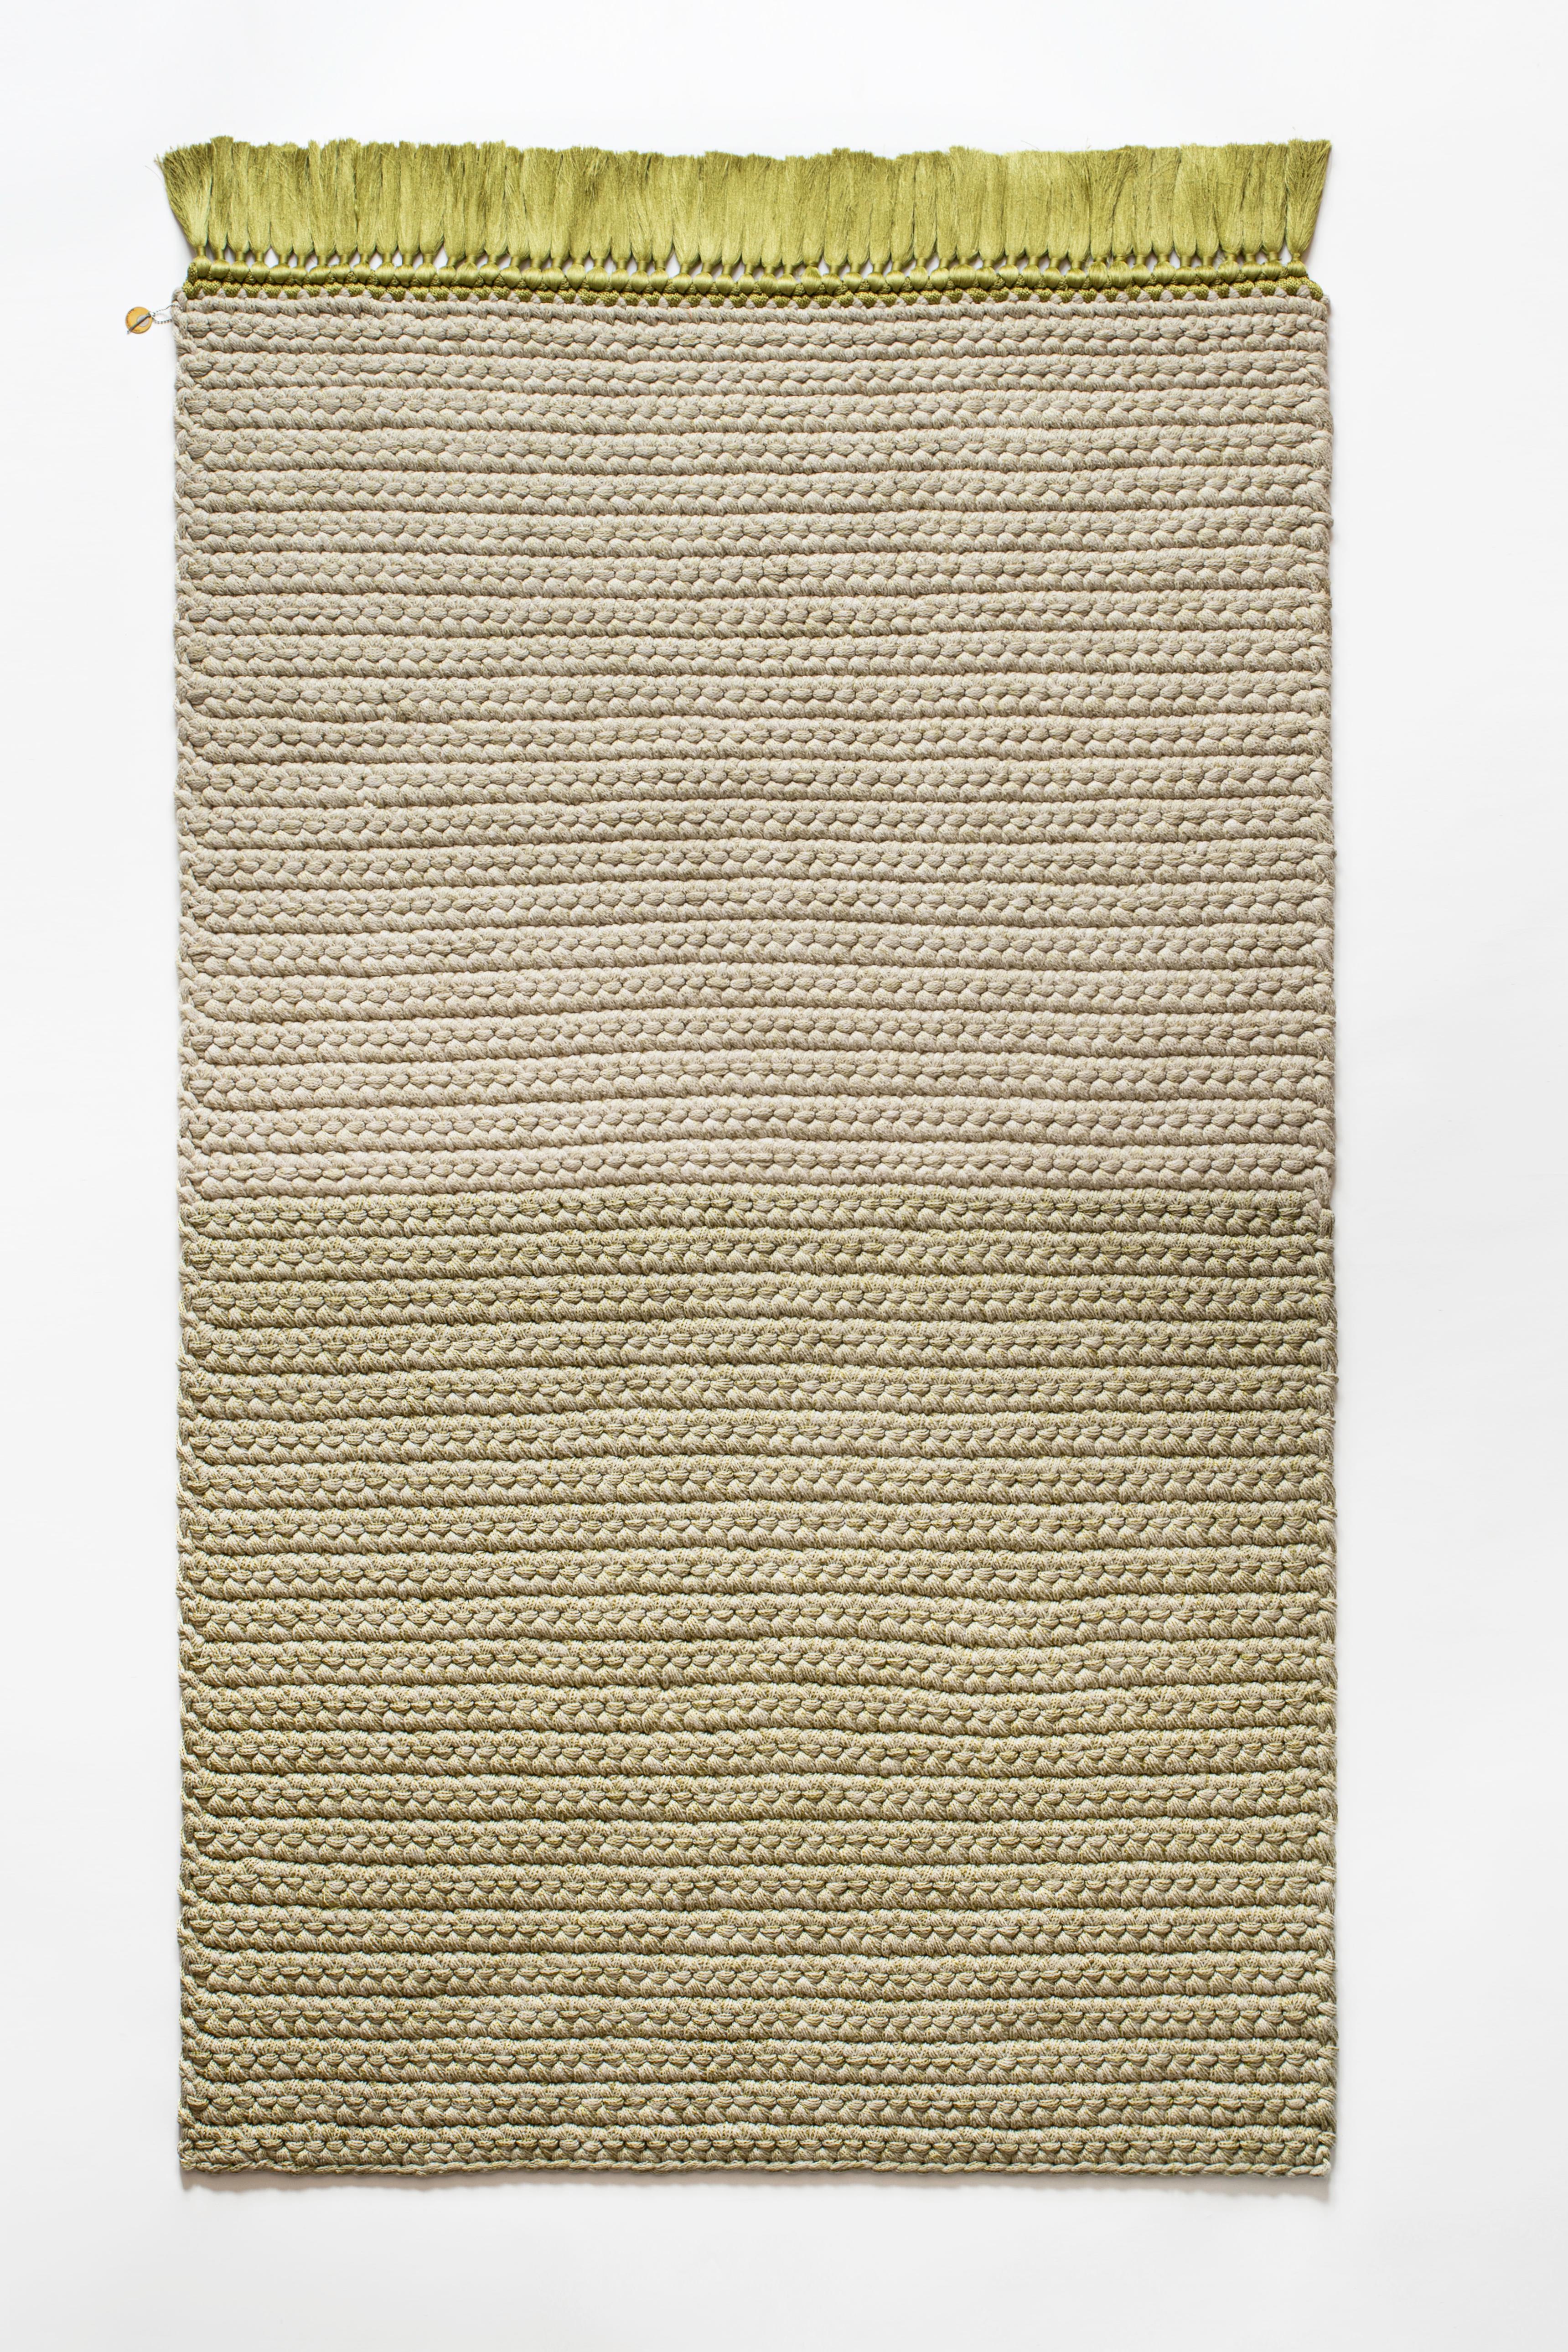 Contemporary Two-Tone Handmade Crochet Cotton and Polyester Thick Luxurious Textile Rug